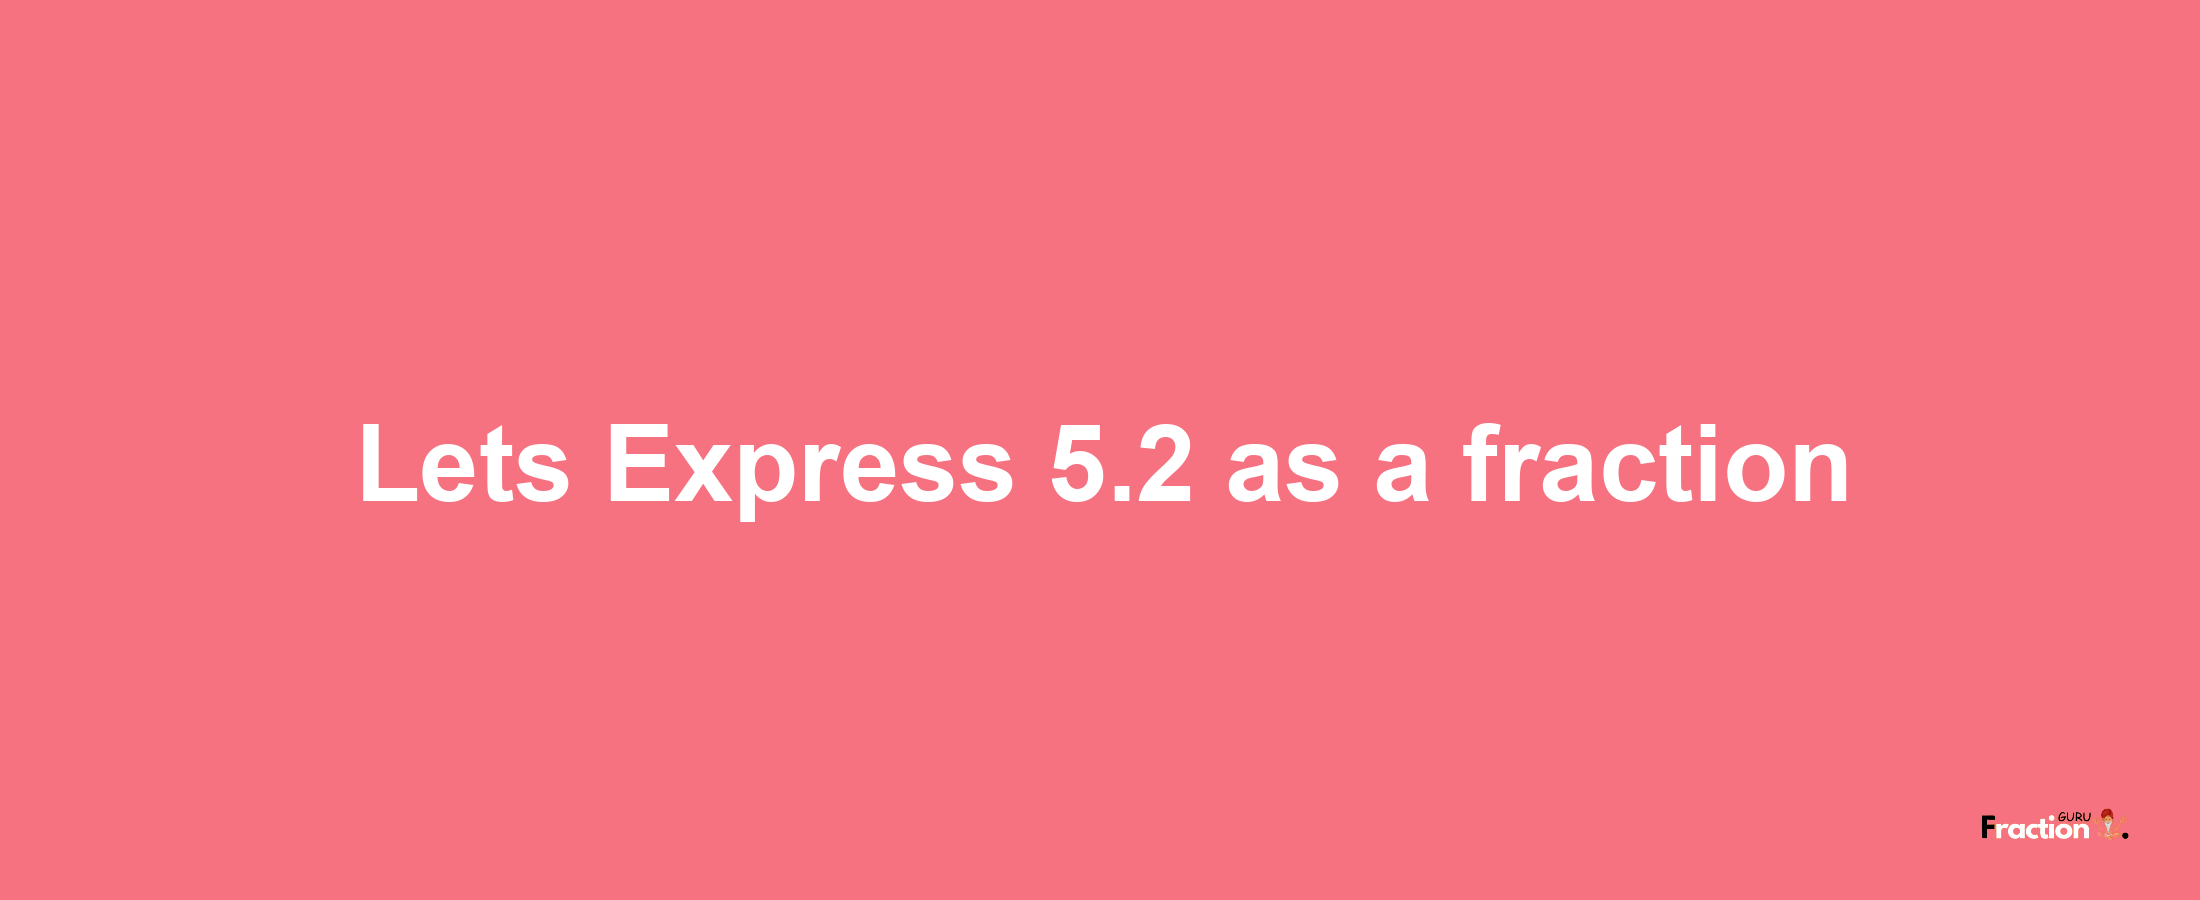 Lets Express 5.2 as afraction